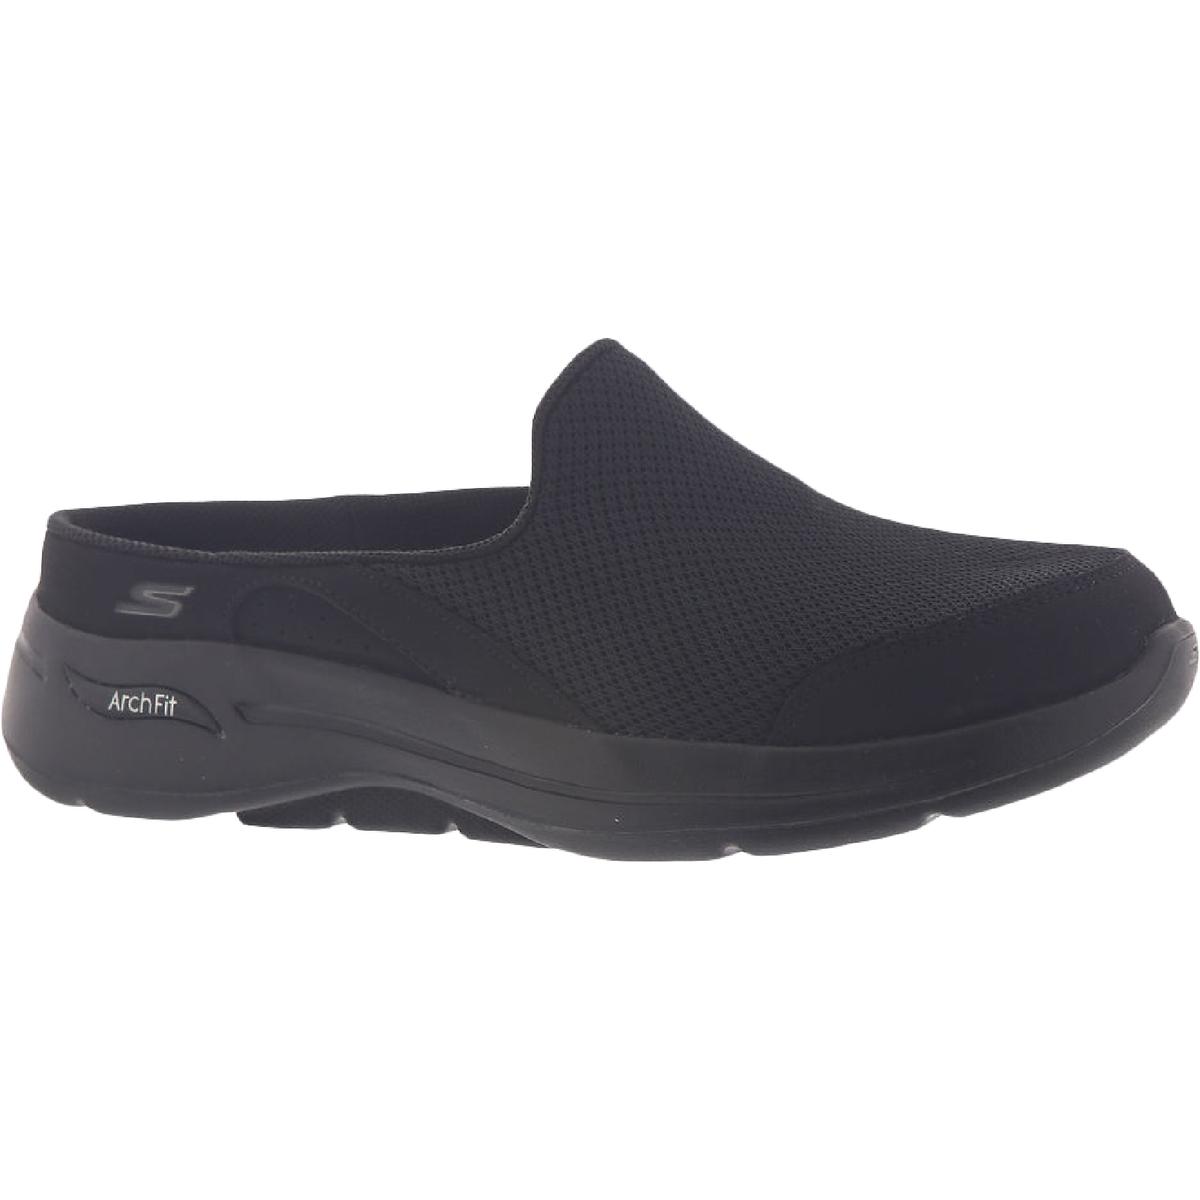 Skechers Go Walk Arch Fit-Seven Seas Womens Leather Lifestyle Slip-On ...